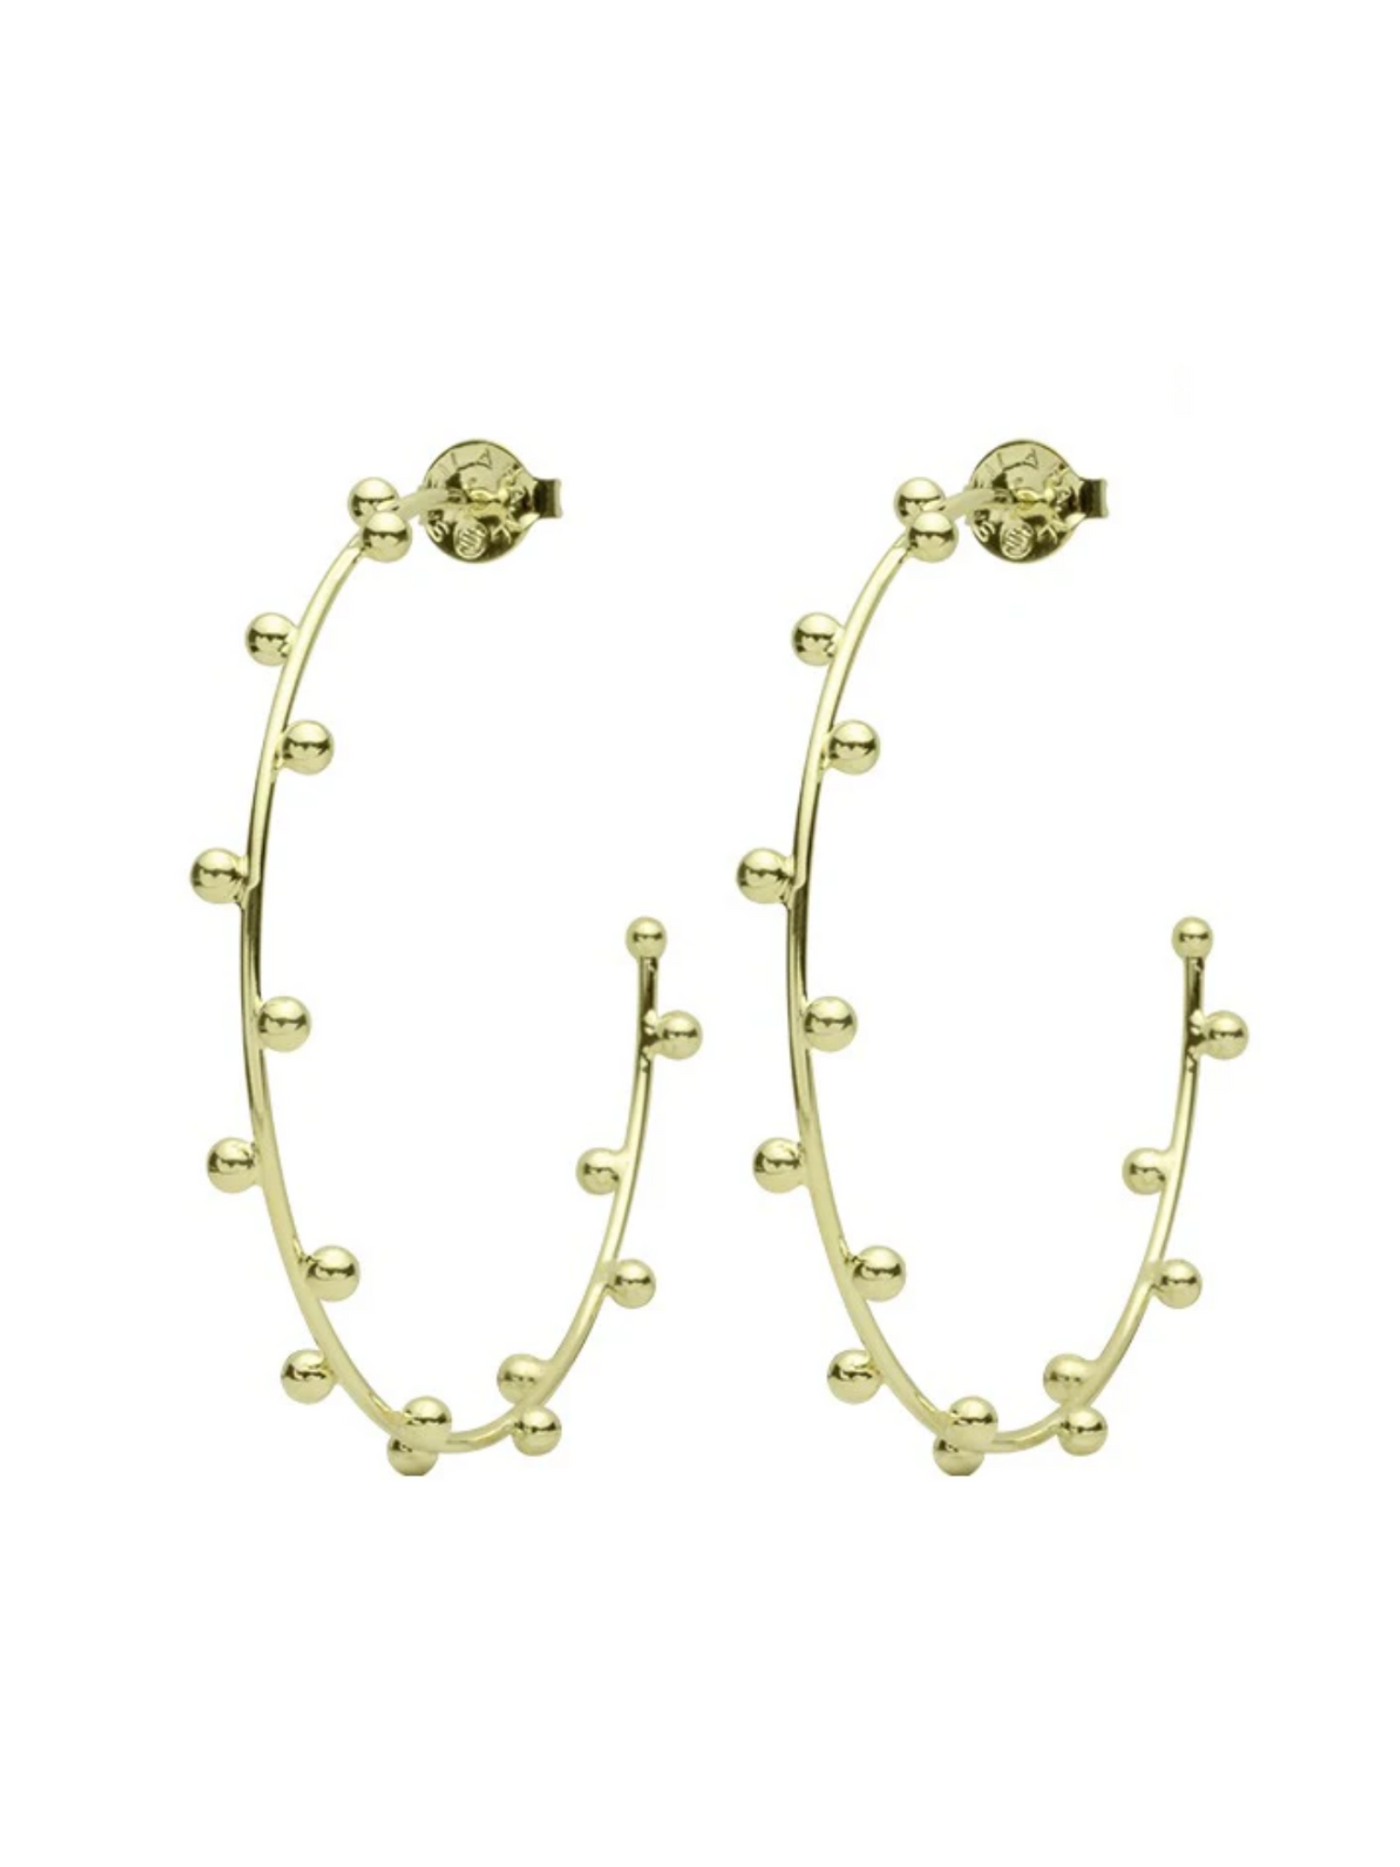 Shelia Fajl Thin Merry Go Round Beaded Hoops in shiny Gold on white background, front view.